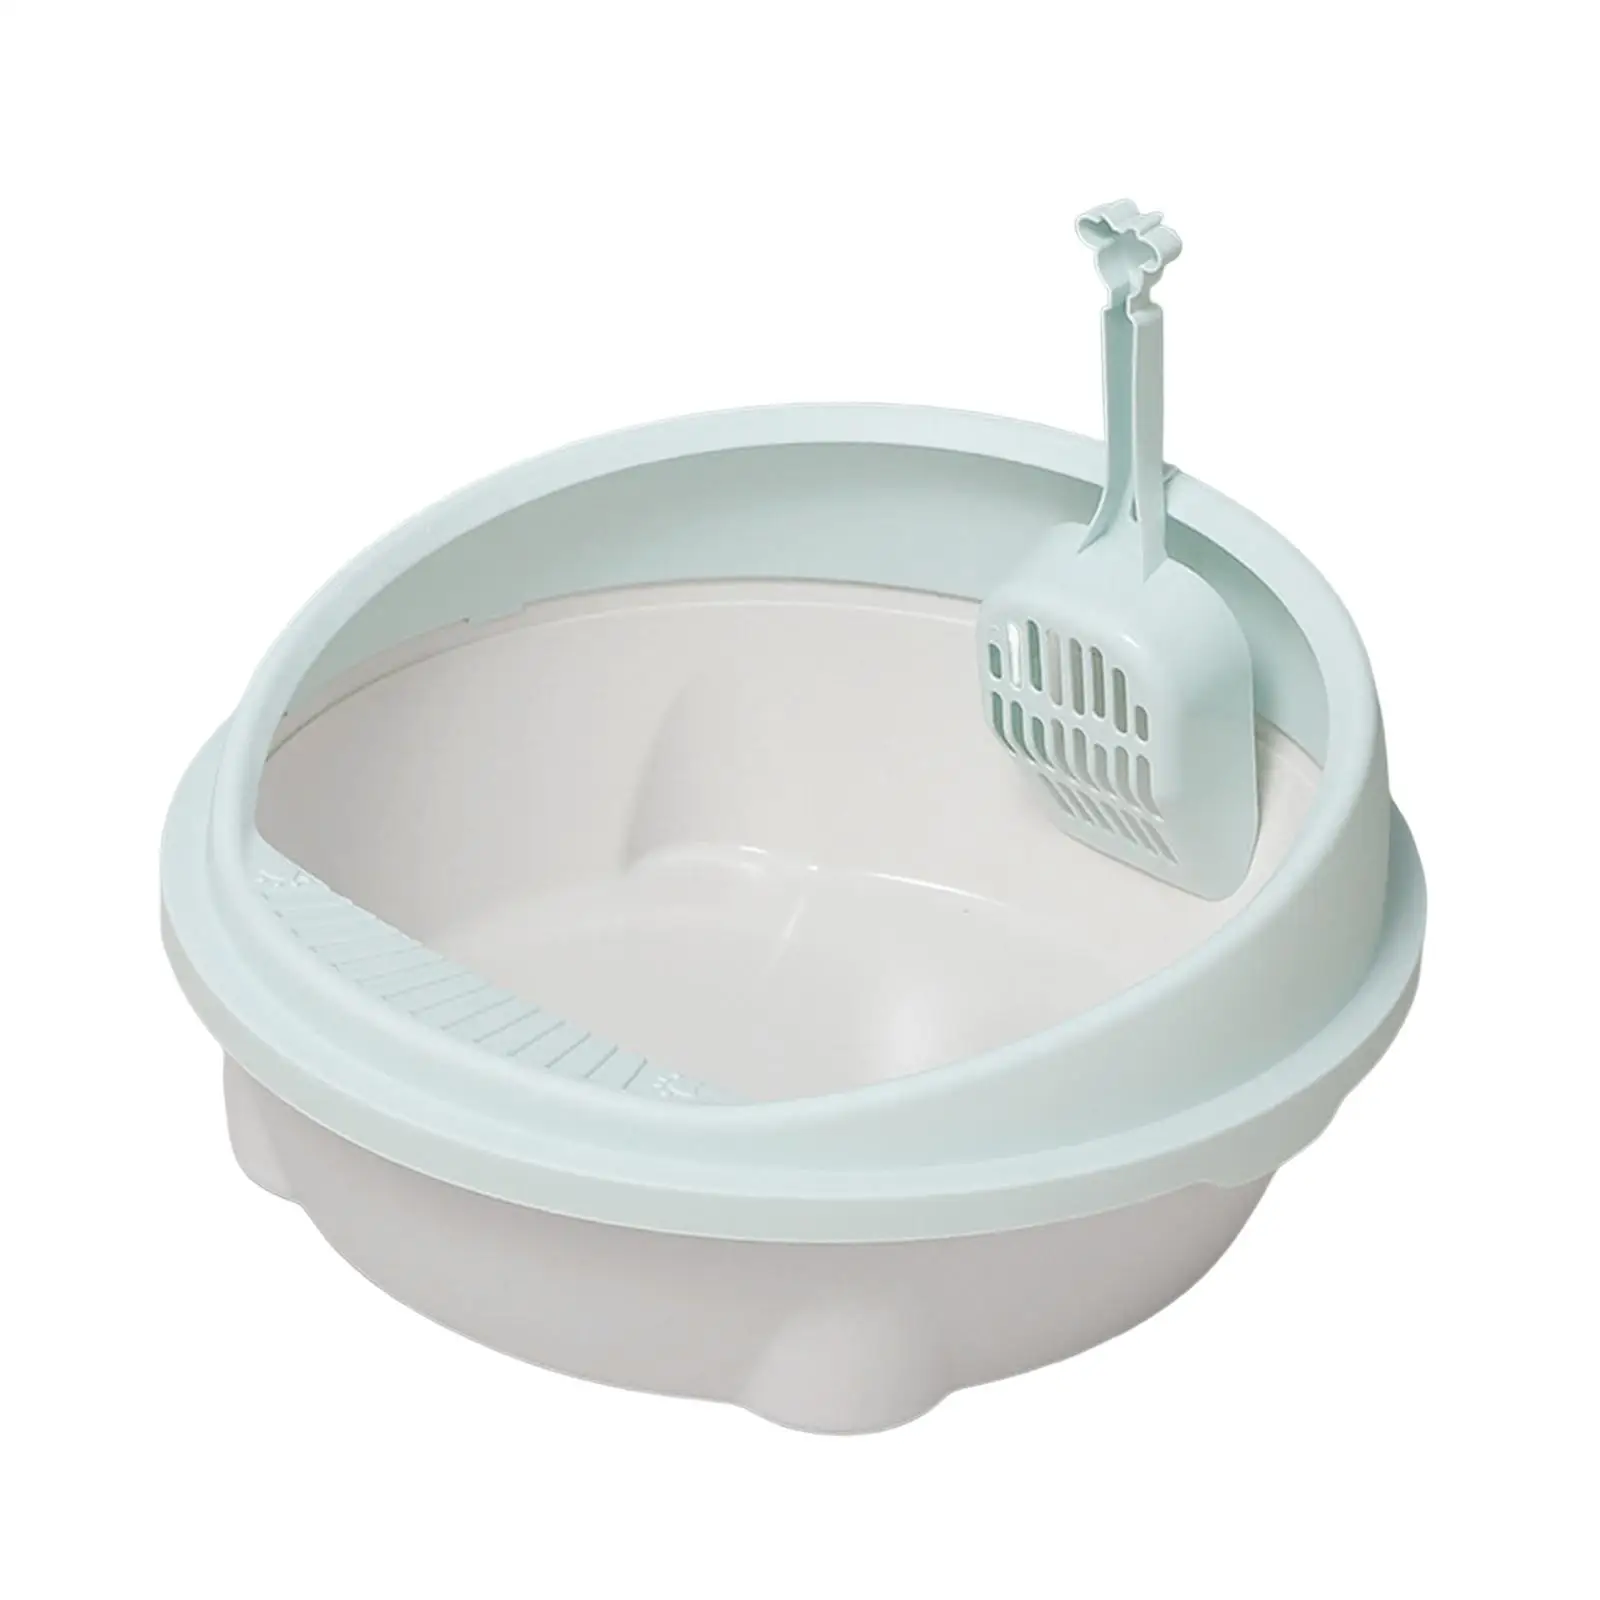 Cat for Indoor Cats, Cat Sandbox Potty Toilet Deep Loo Heightening Round Open Kitty Litter Pan for Kitty Bunny Easy to Clean